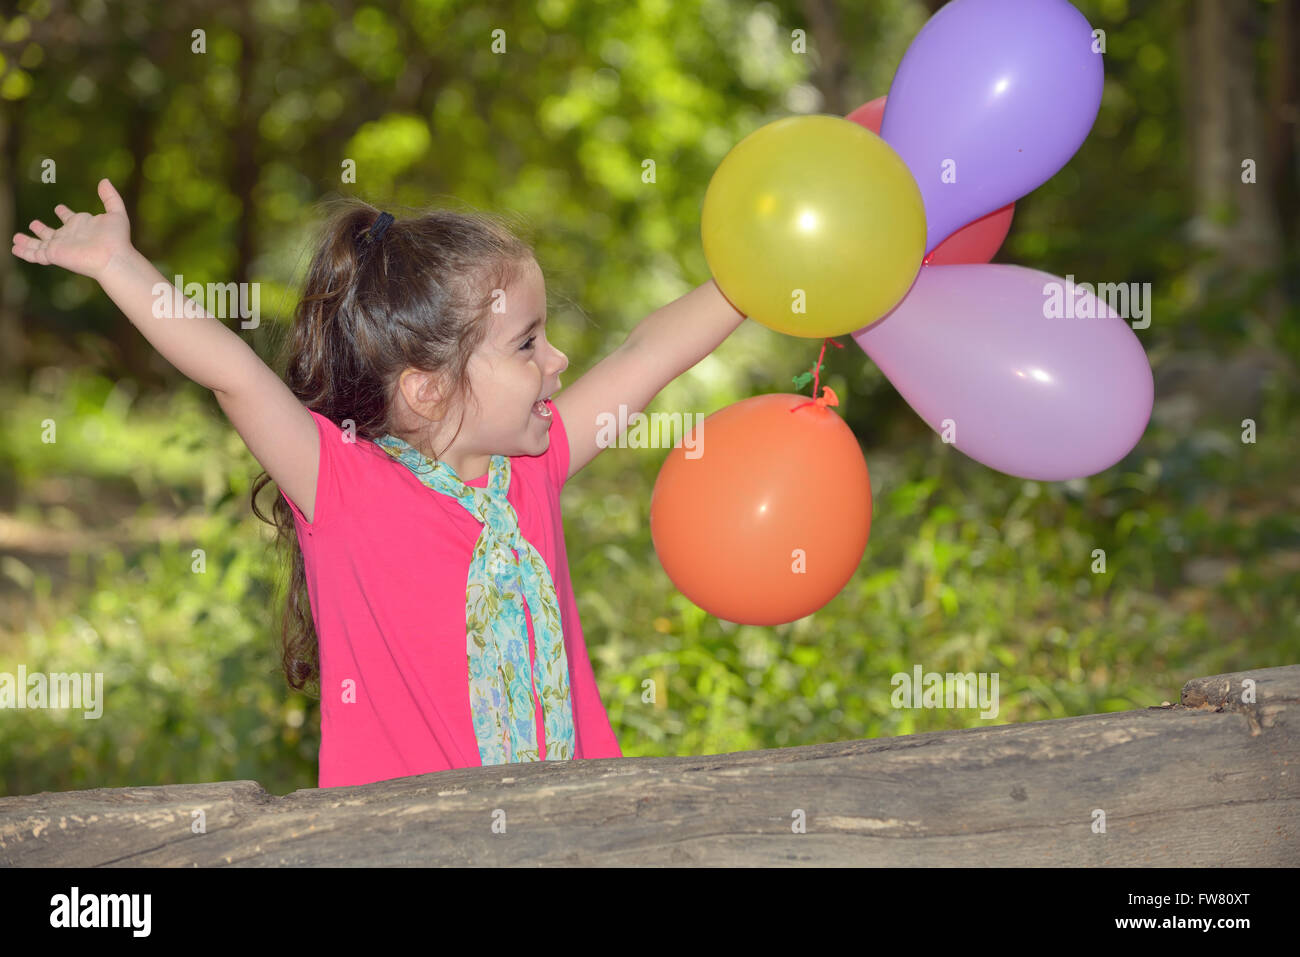 Little girl playing with balloons in forest Stock Photo